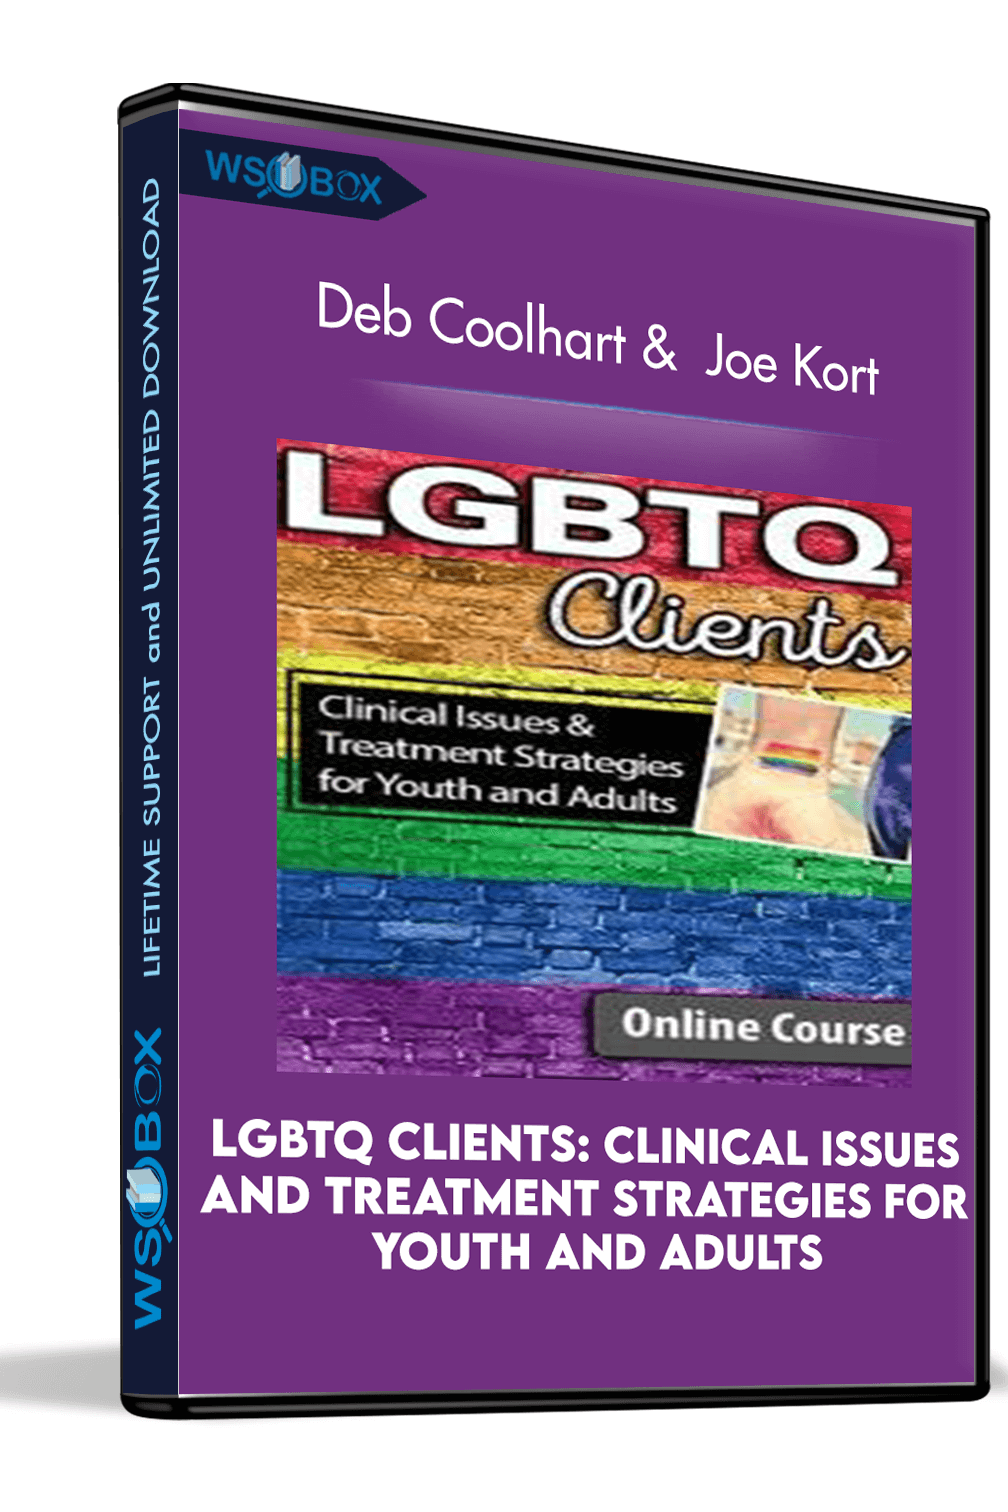 lgbtq-clients-clinical-issues-and-treatment-strategies-for-youth-and-adults-deb-coolhart-joe-kort